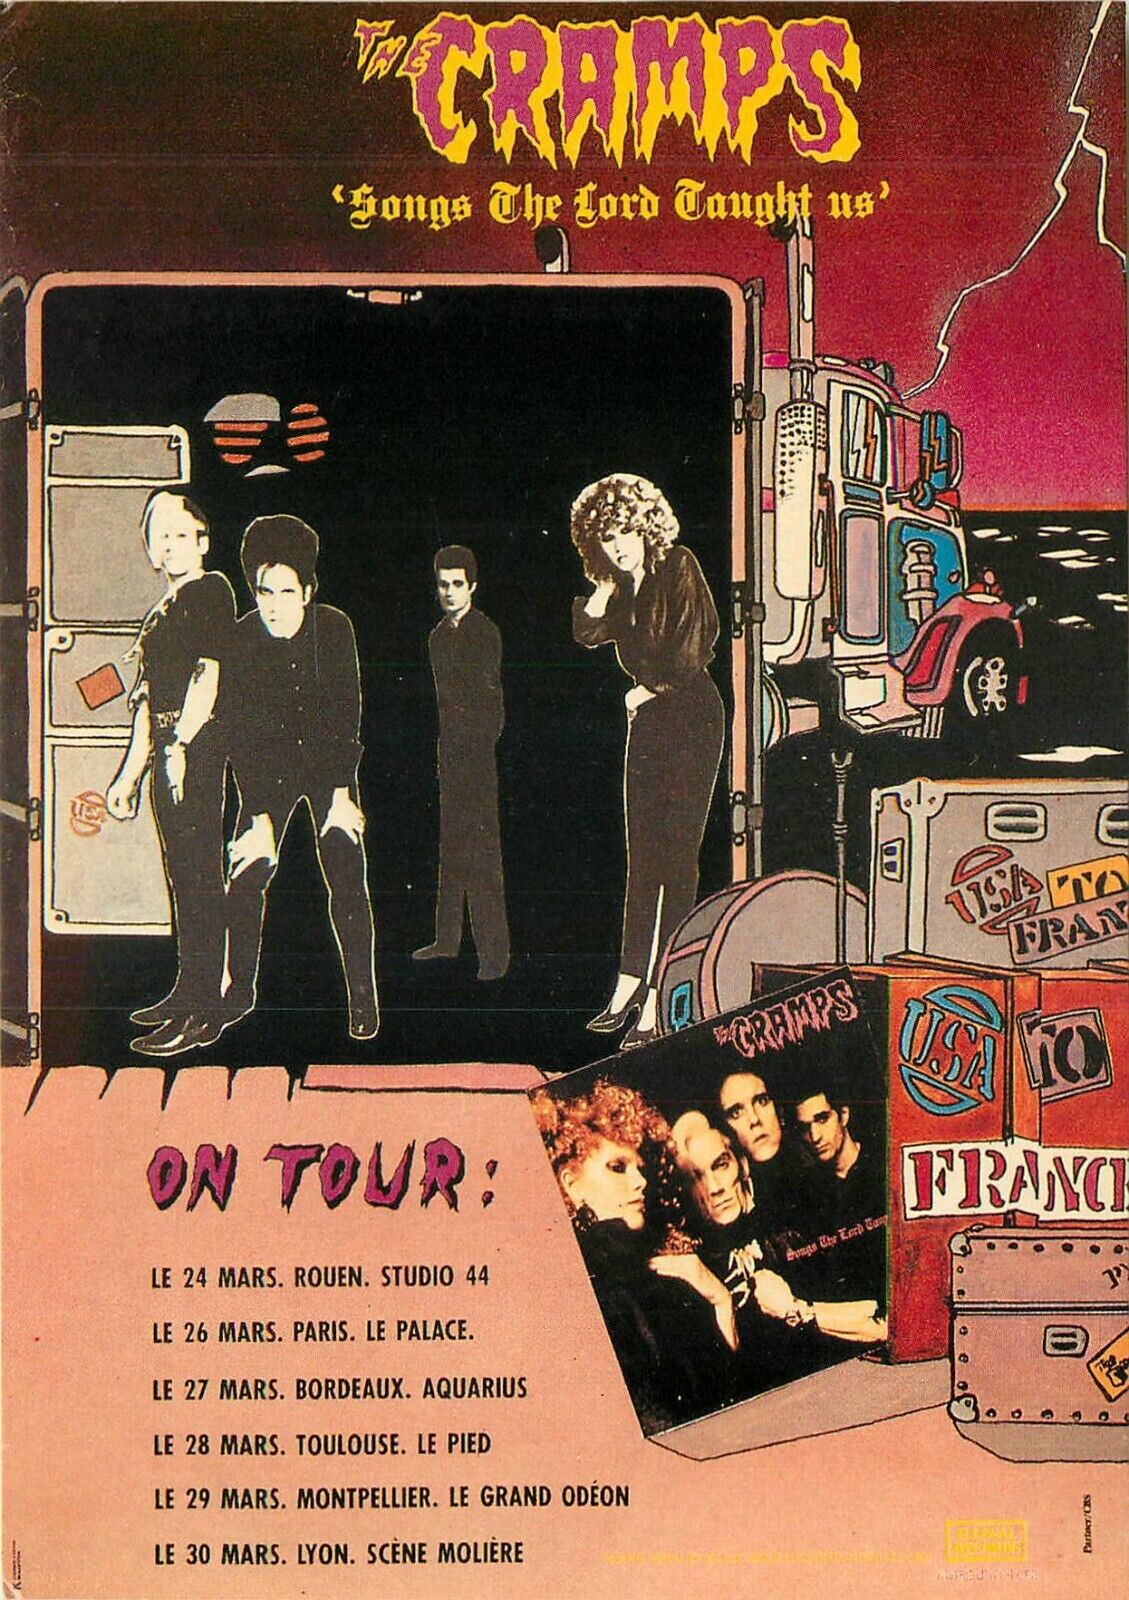 The Cramps Vintage French Postcard Record On Tour Promotion 